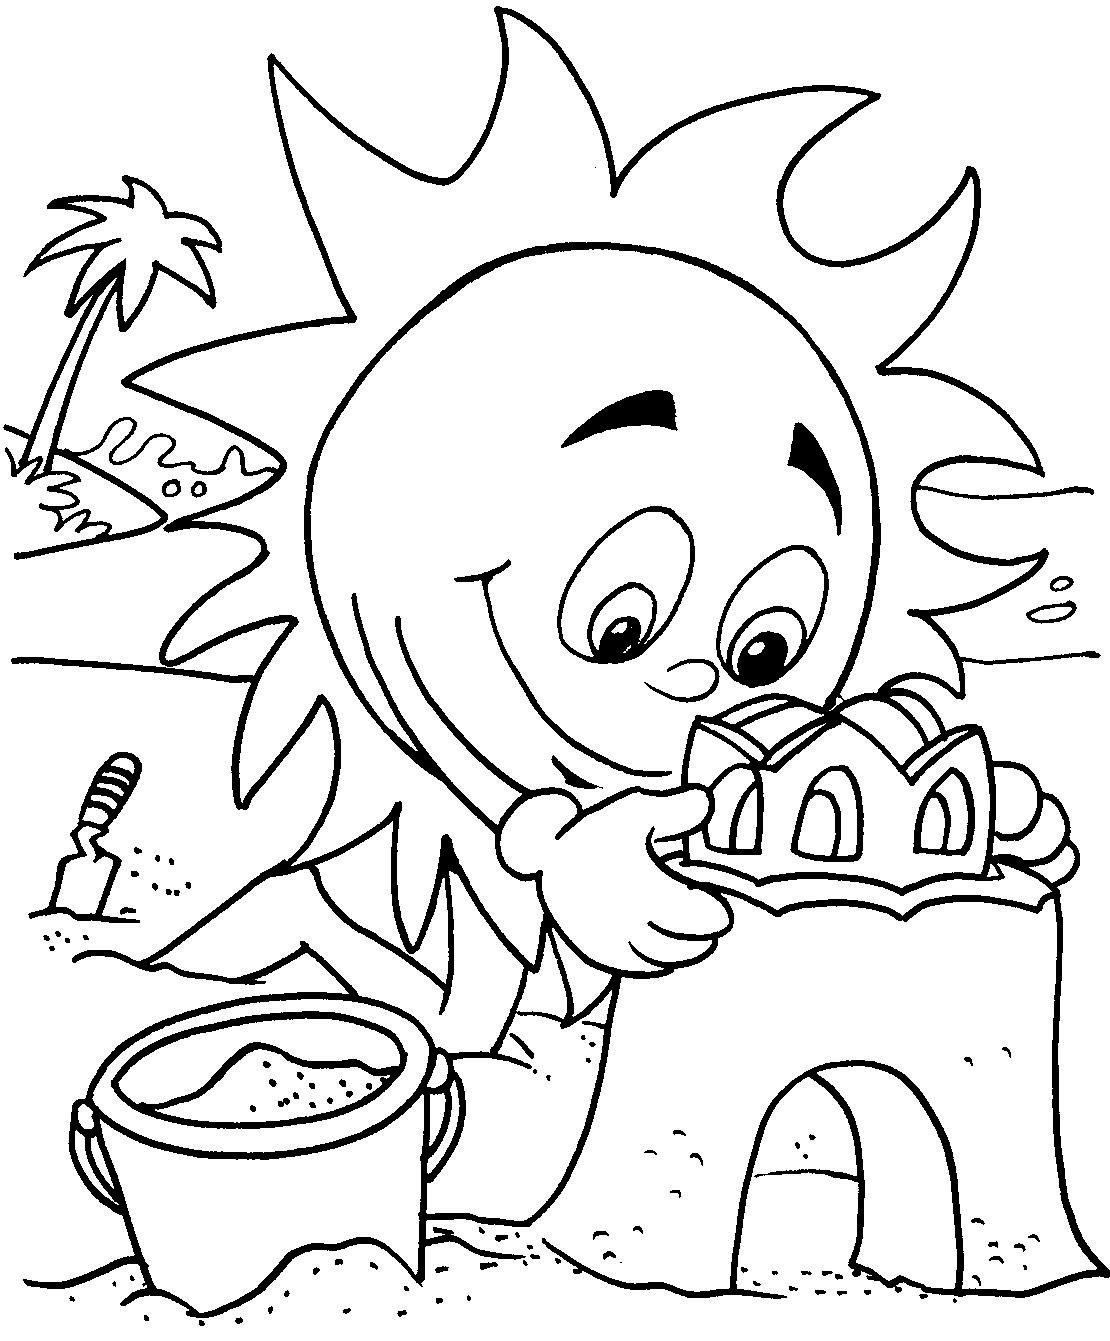 Coloring Sheets For Girls Summer
 summer coloring pages for girls Free